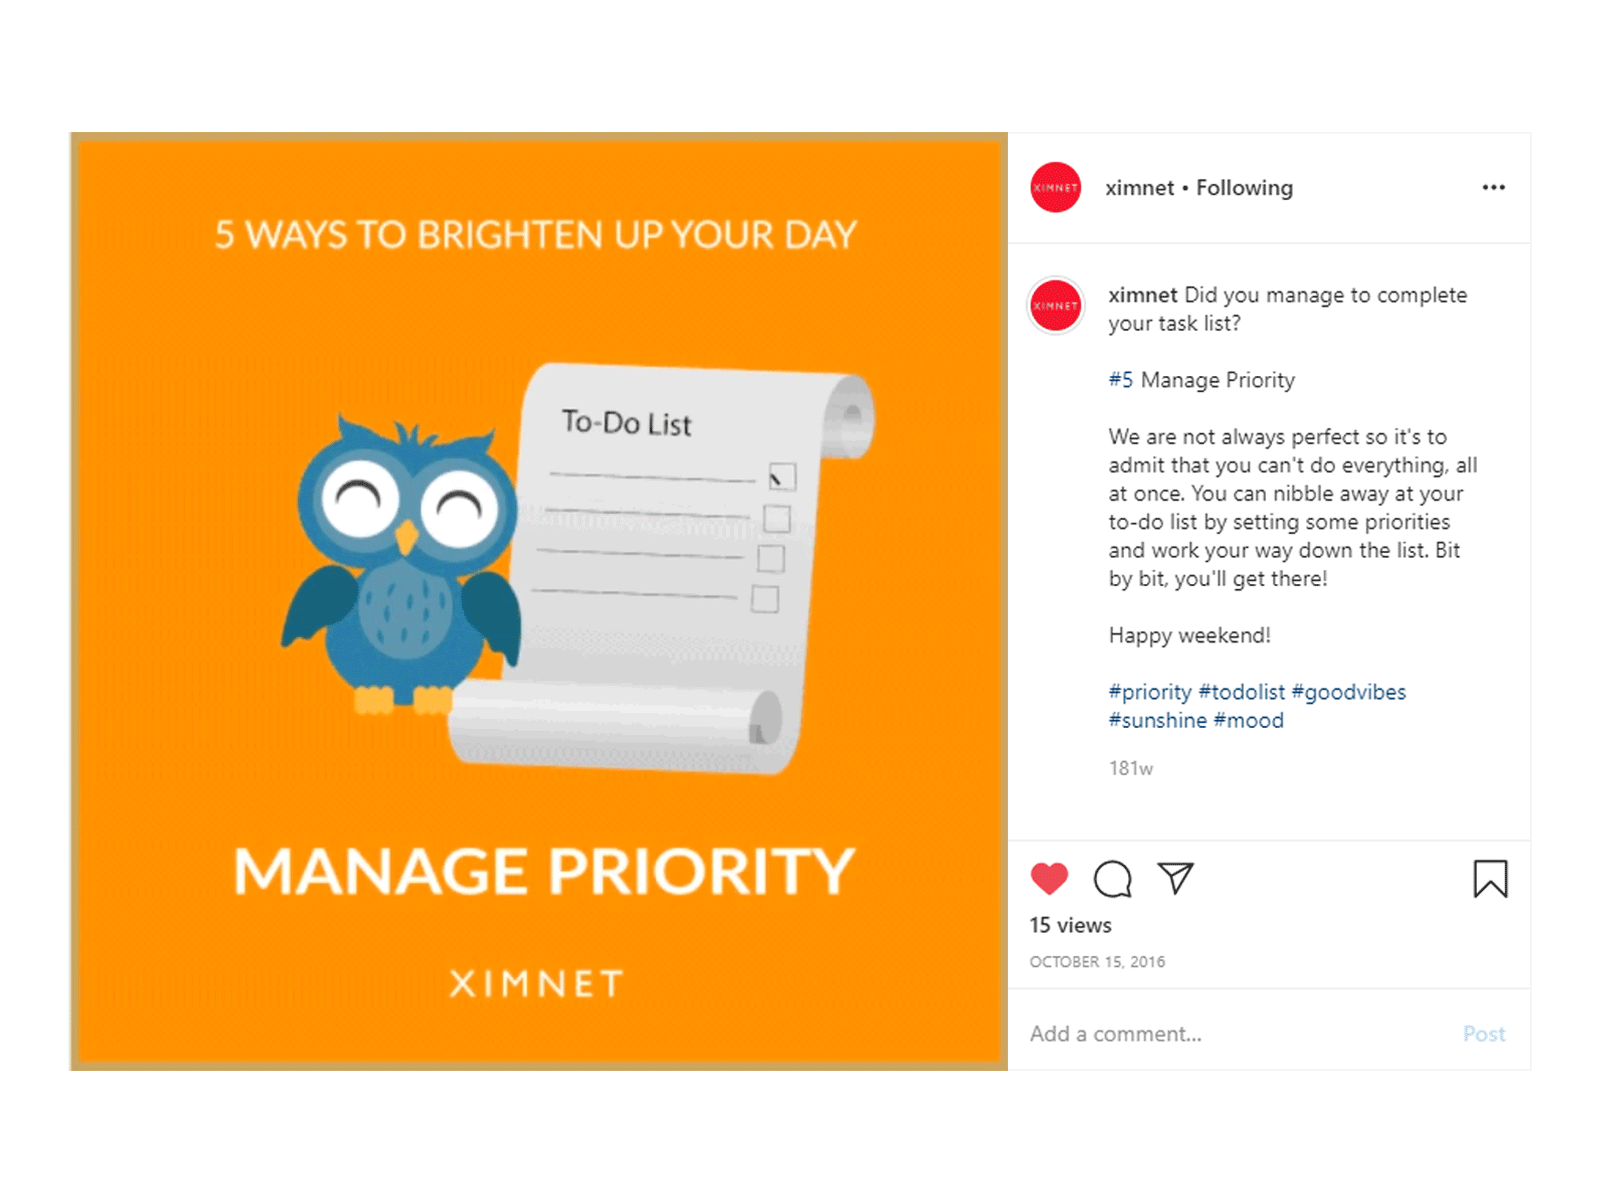 5 Ways To Brighten Up Your Day - Manage Priorities